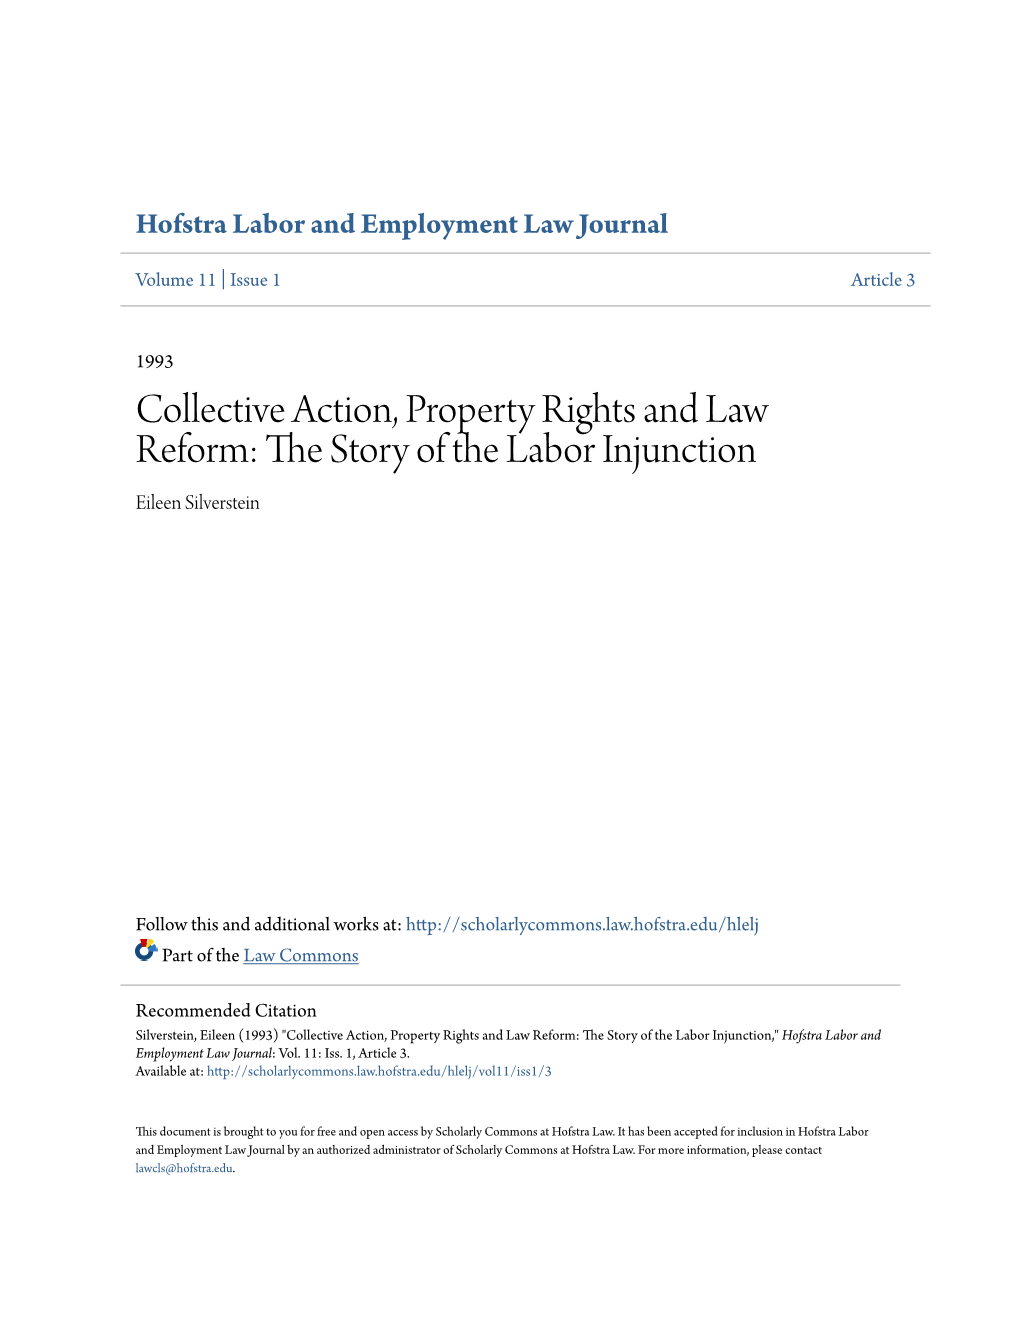 Collective Action, Property Rights and Law Reform: the Story of the Labor Injunction